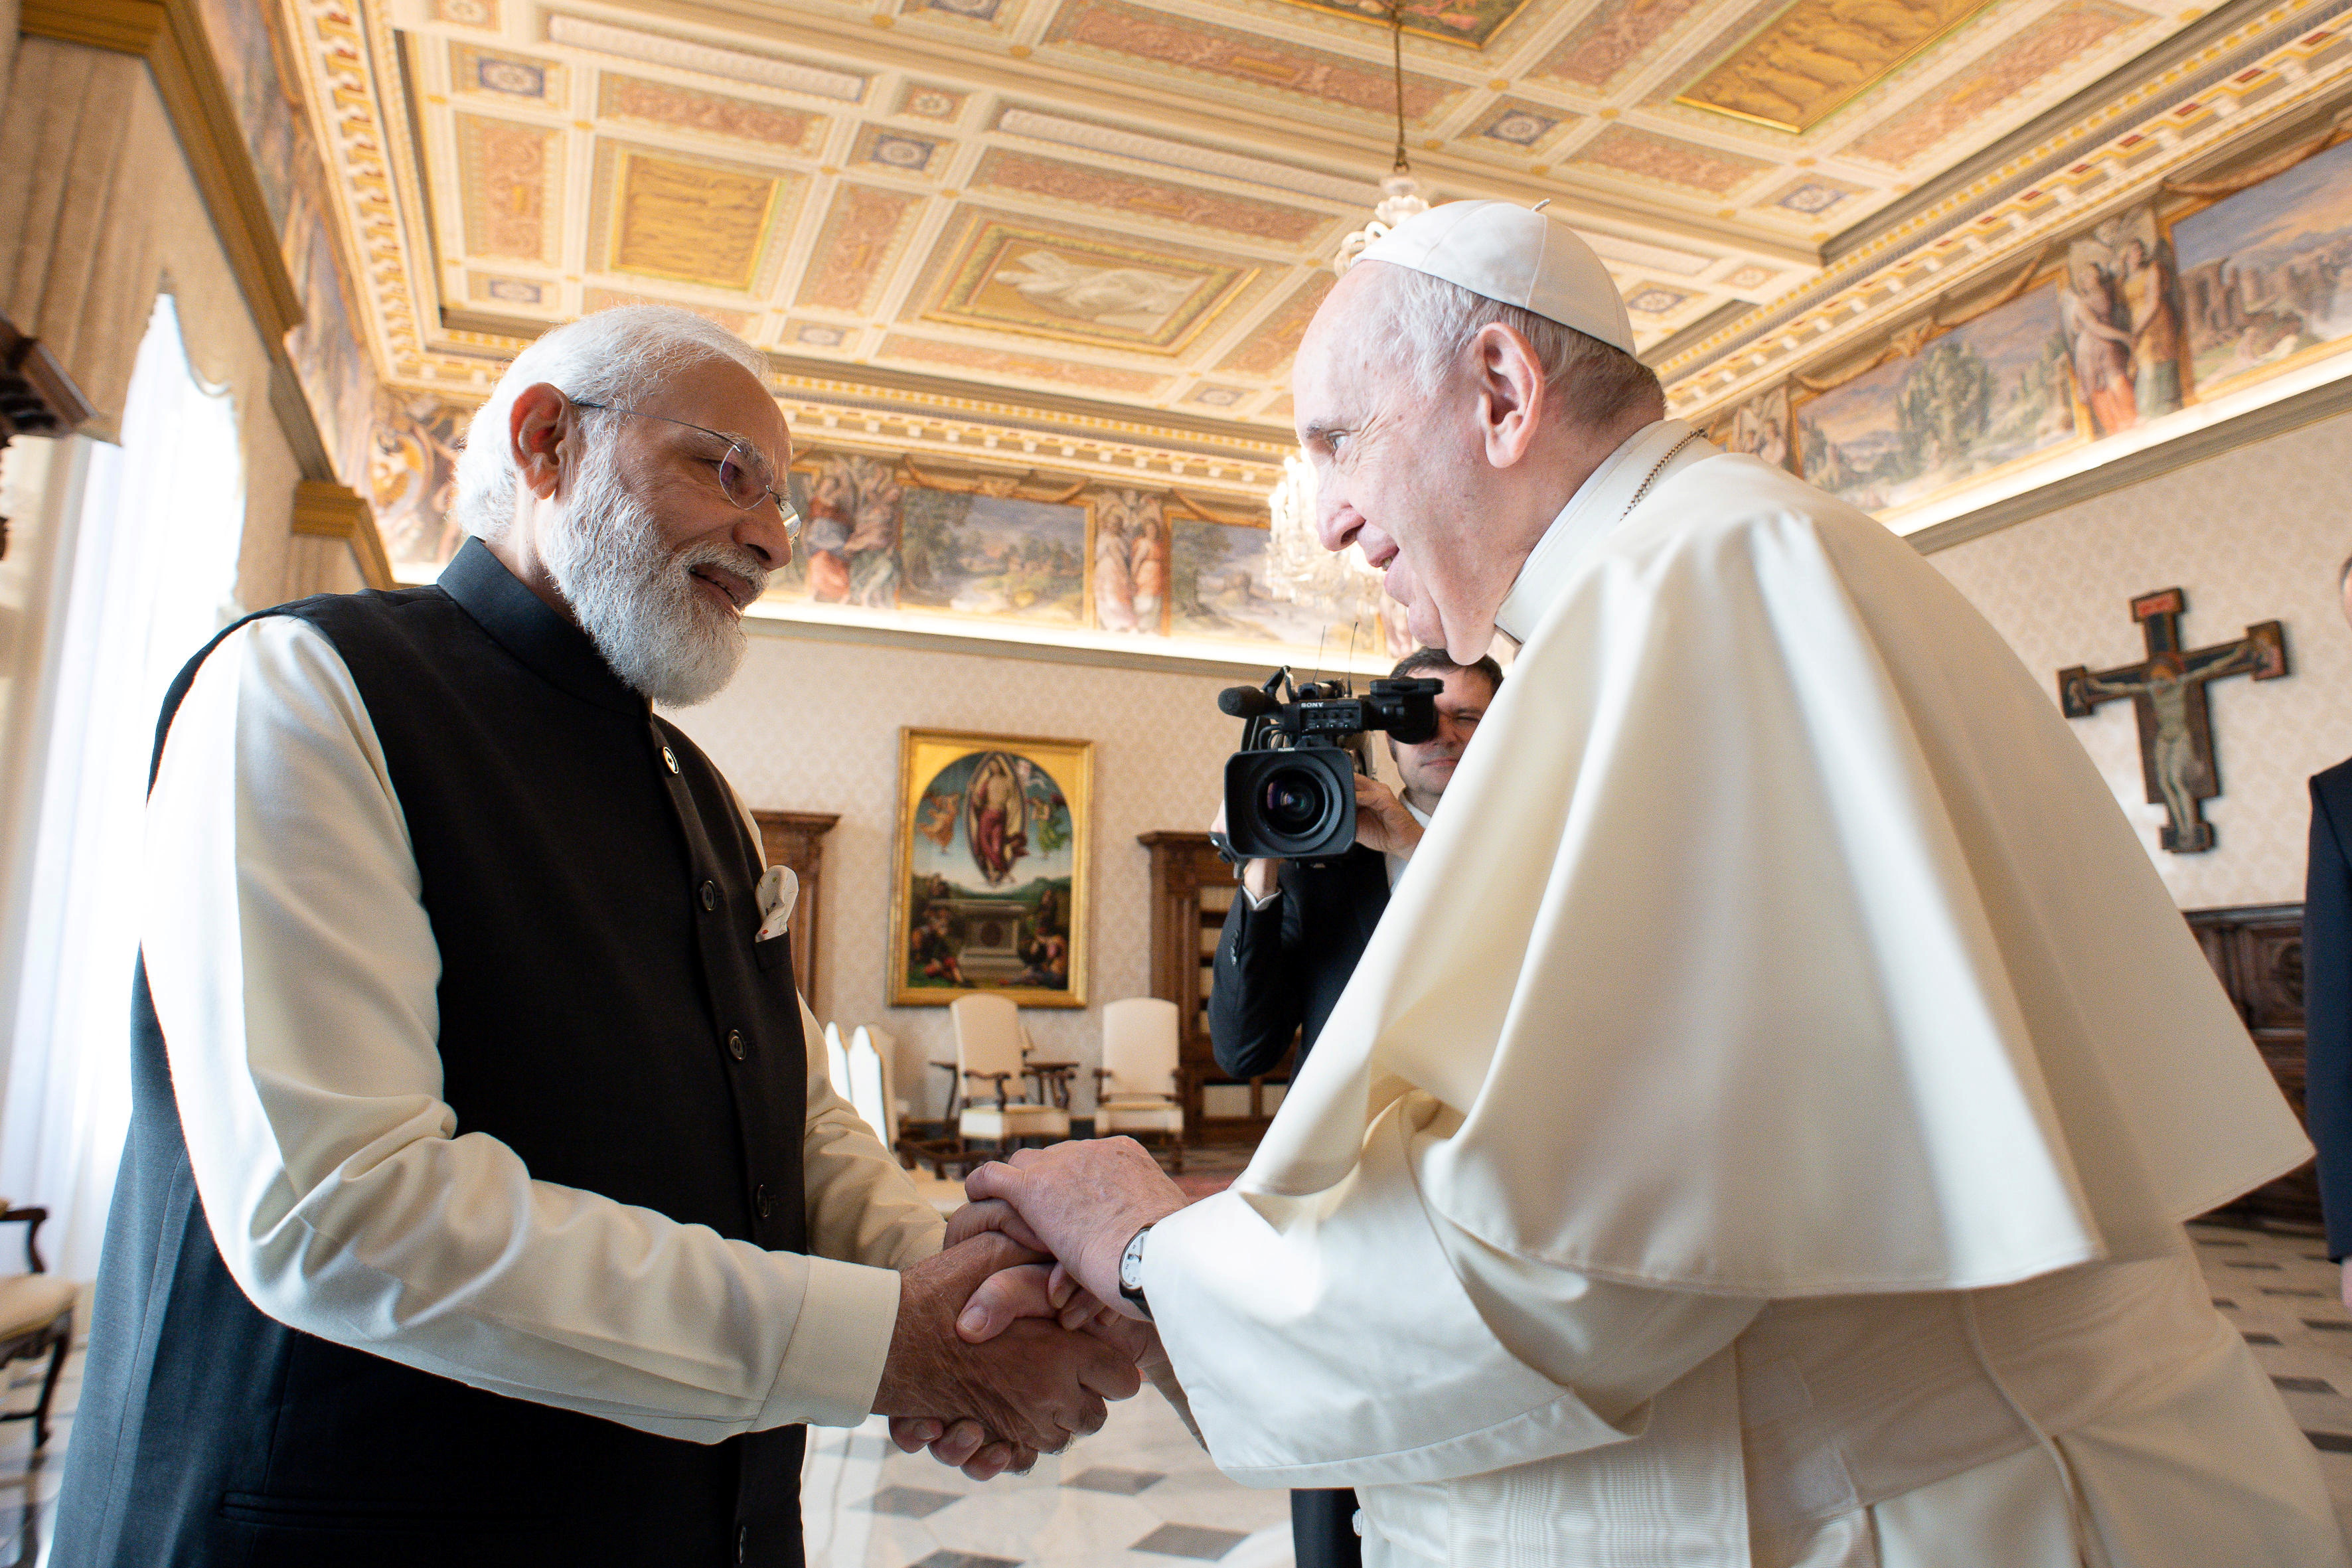 Pope Francis meets with India's Prime Minister Modi at the Vatican